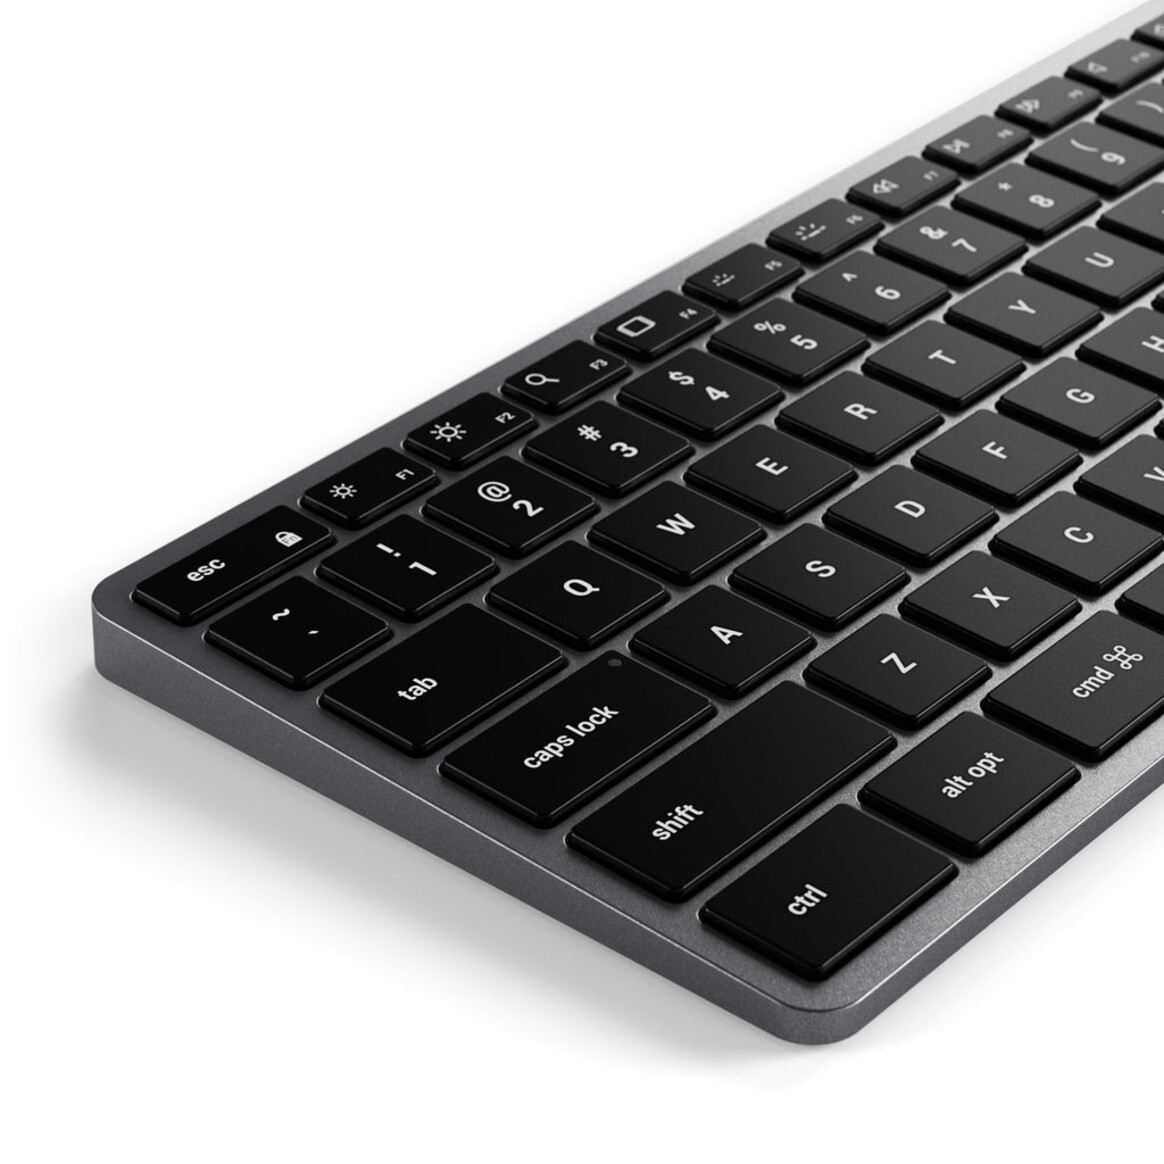 <h1 style="text-align: center;">Satechi Slim W3 USB-C Wired Keyboard-DE (German)</h1>